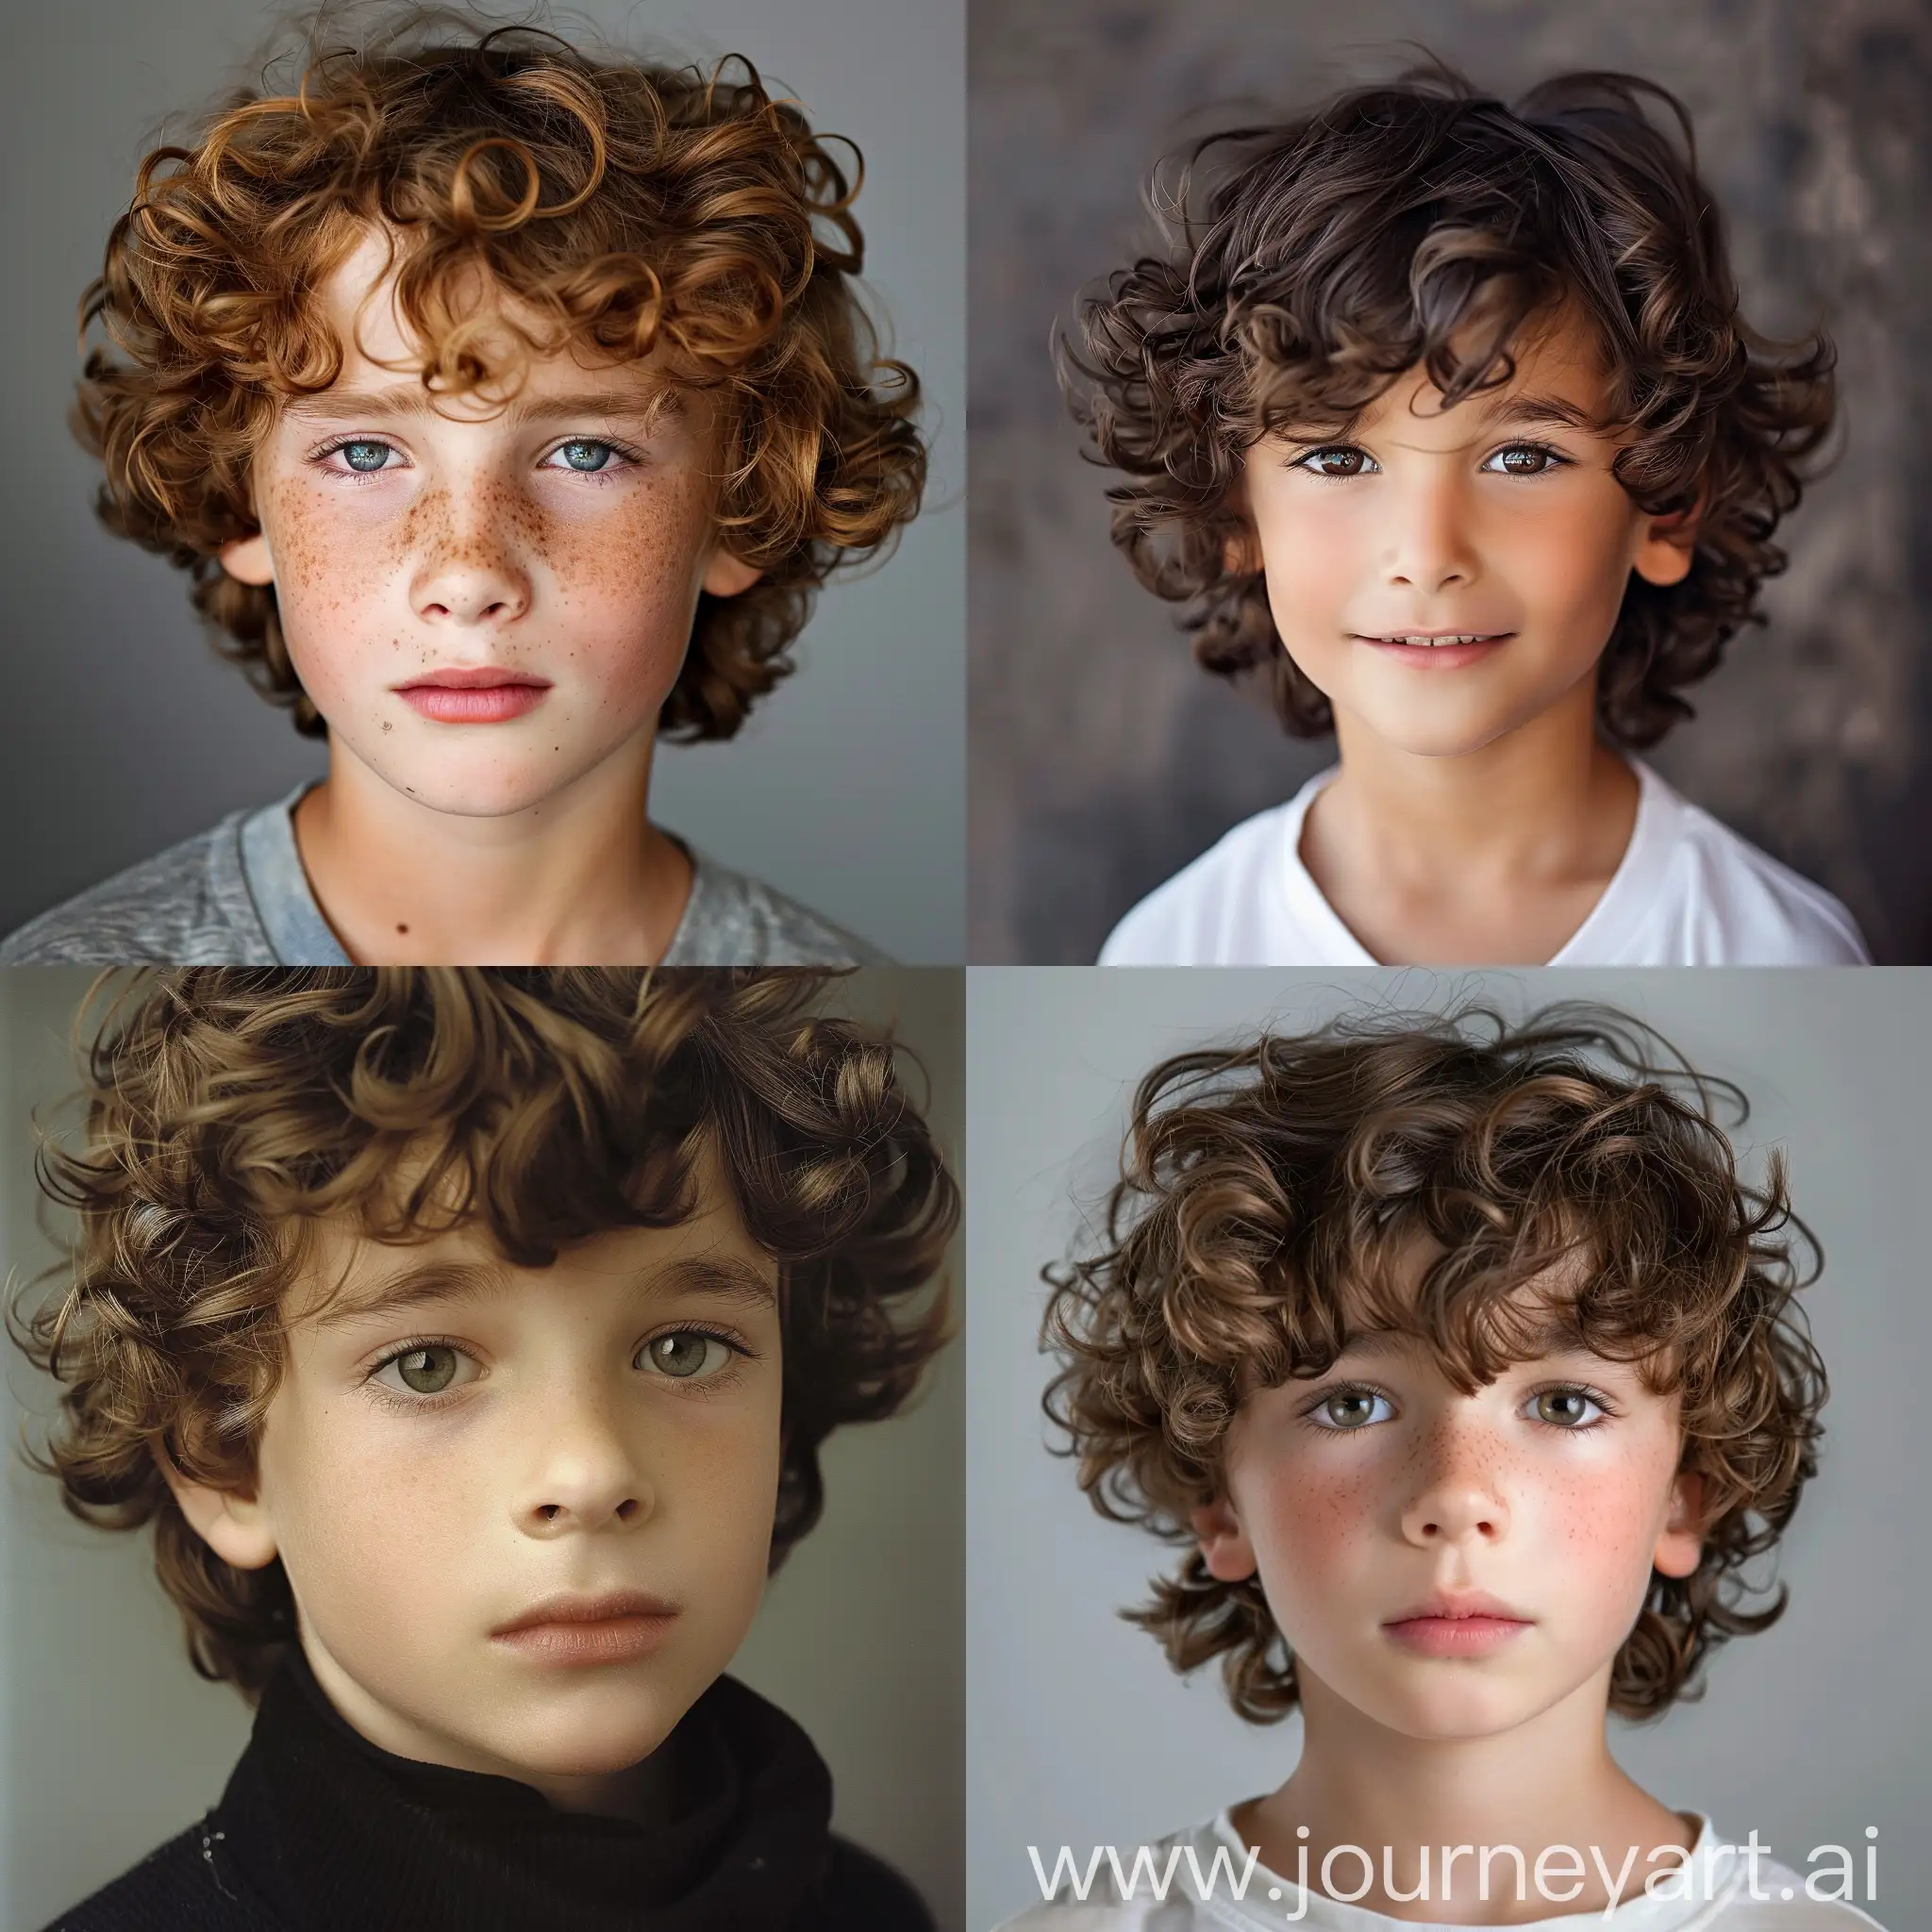 Young boy with curling hair